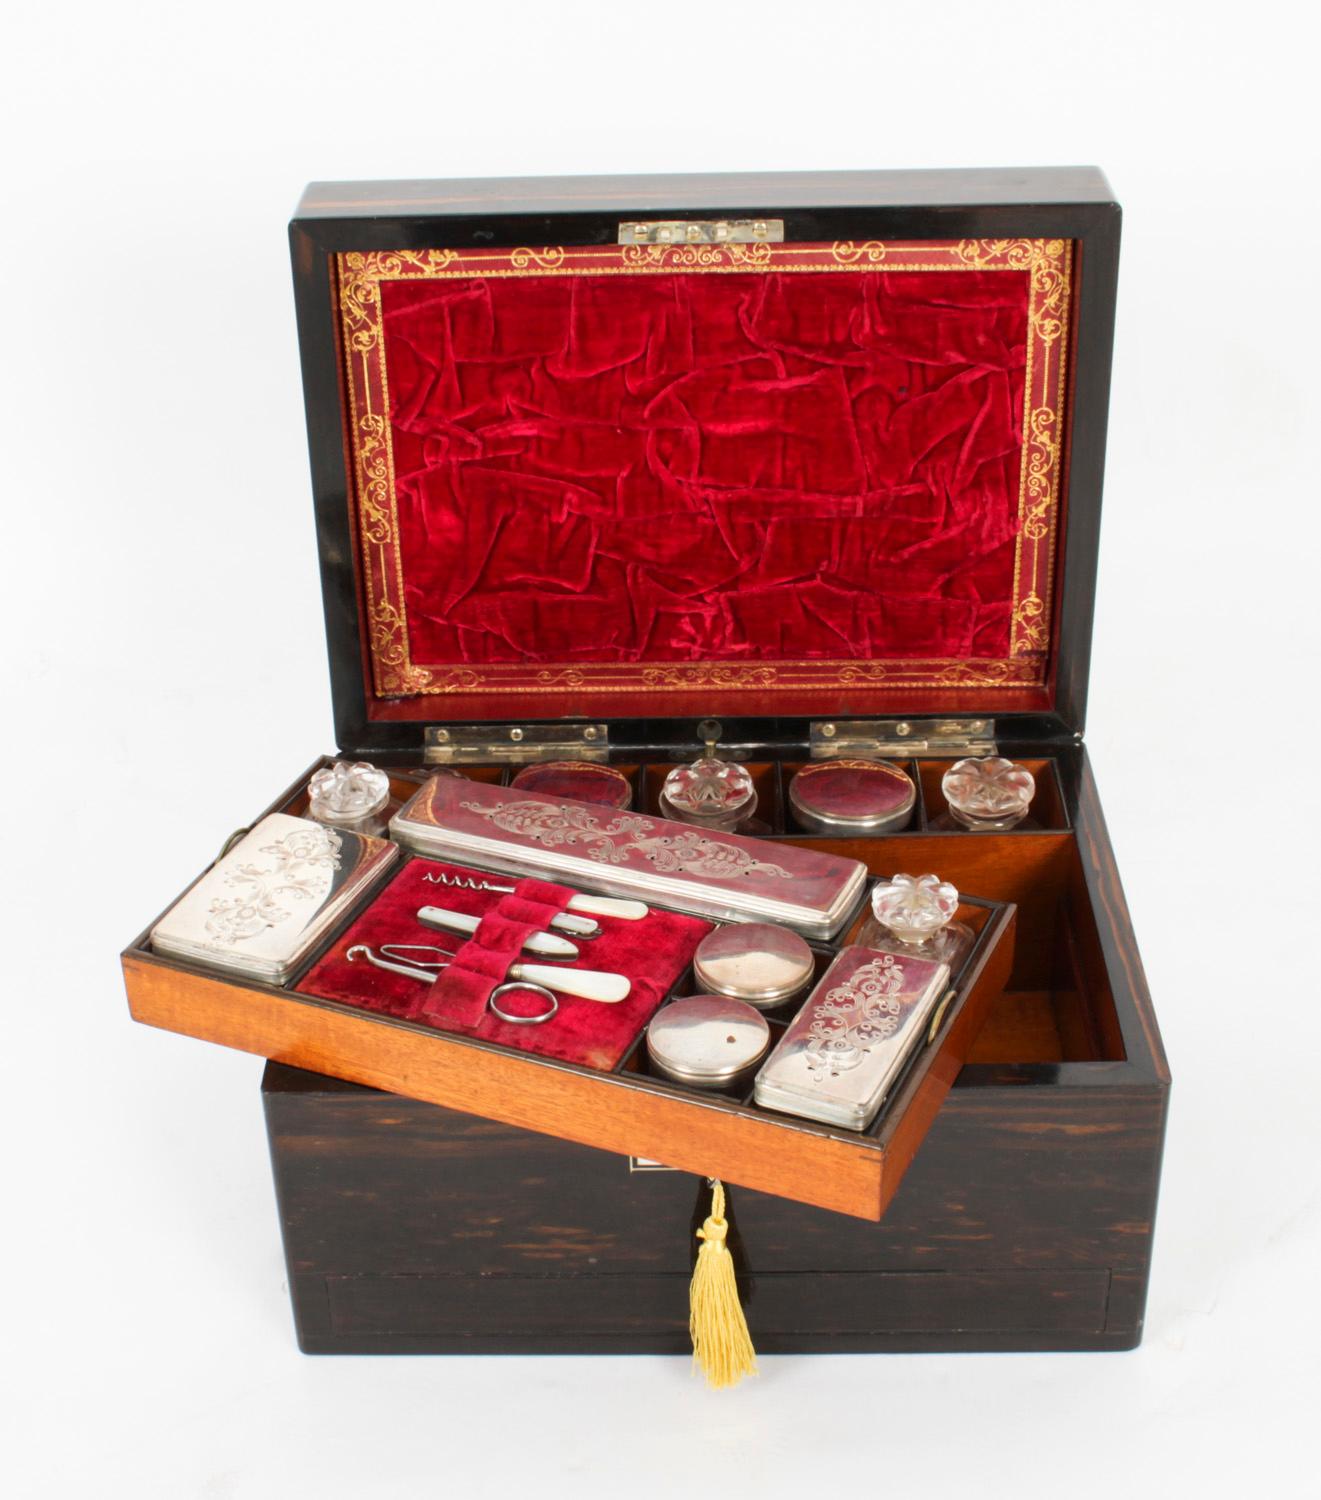 This is a stunning antique Victorian lady's travelling case, circa 1870 in date.
 
This traveling case is made of coromandel wood and features a mother of pearl initialled plaque.
 
The interior is well fitted with twelve Sheffield silver plated